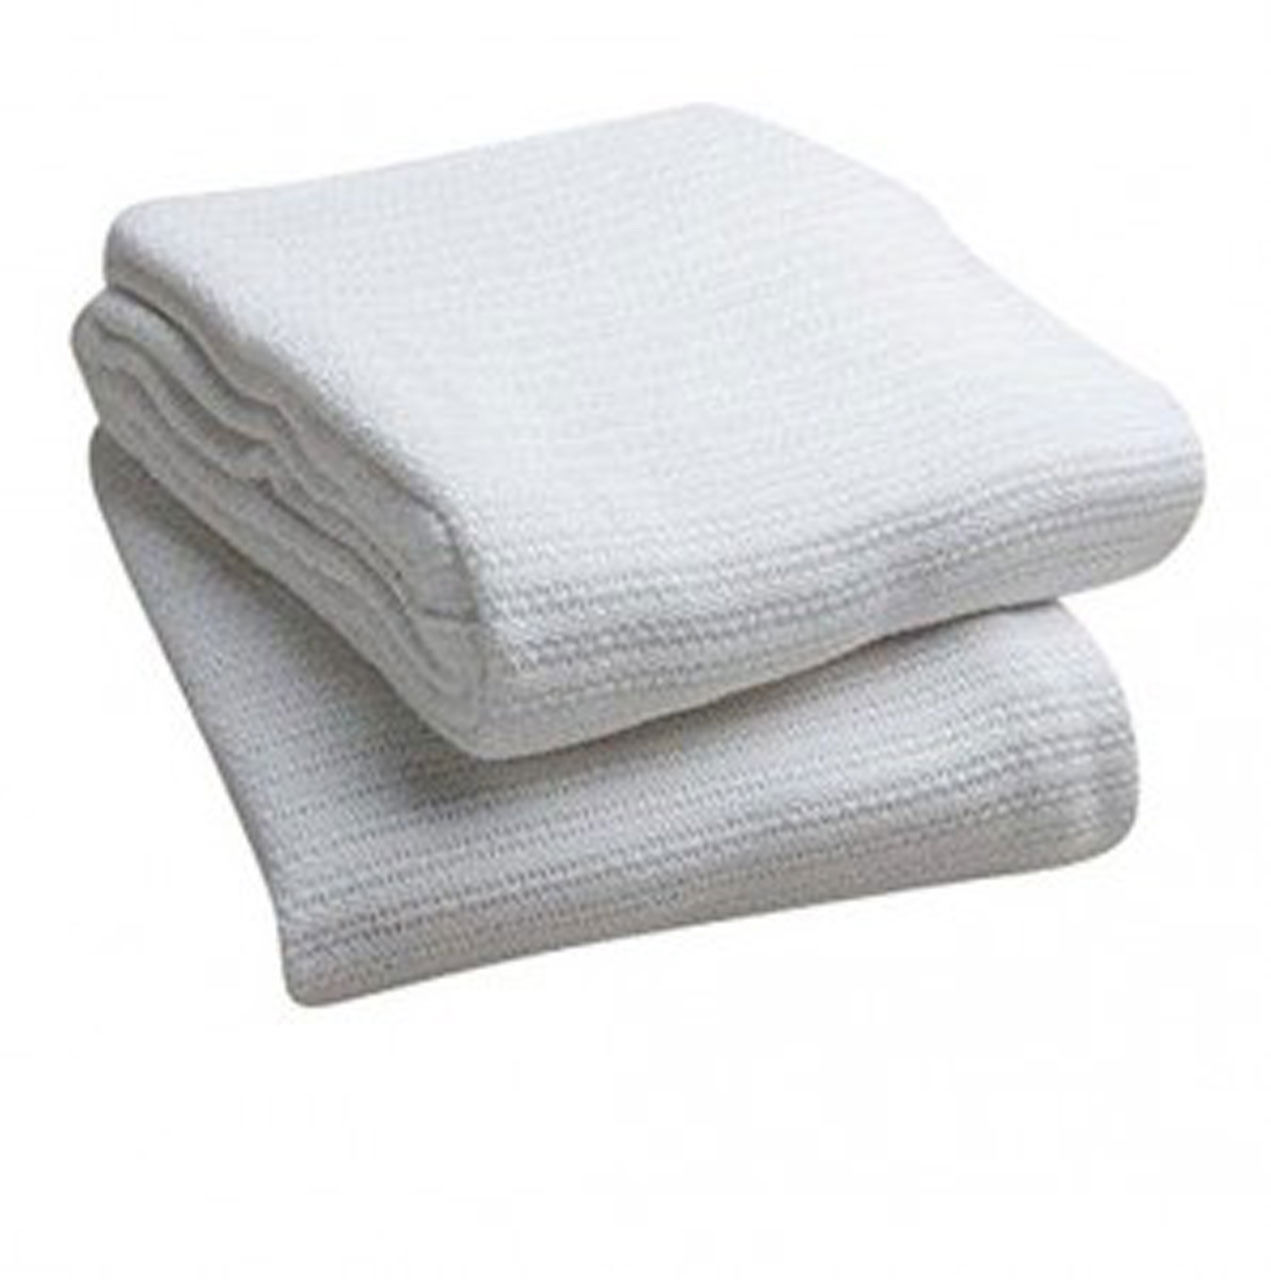 What is the size of the white open weave blanket?